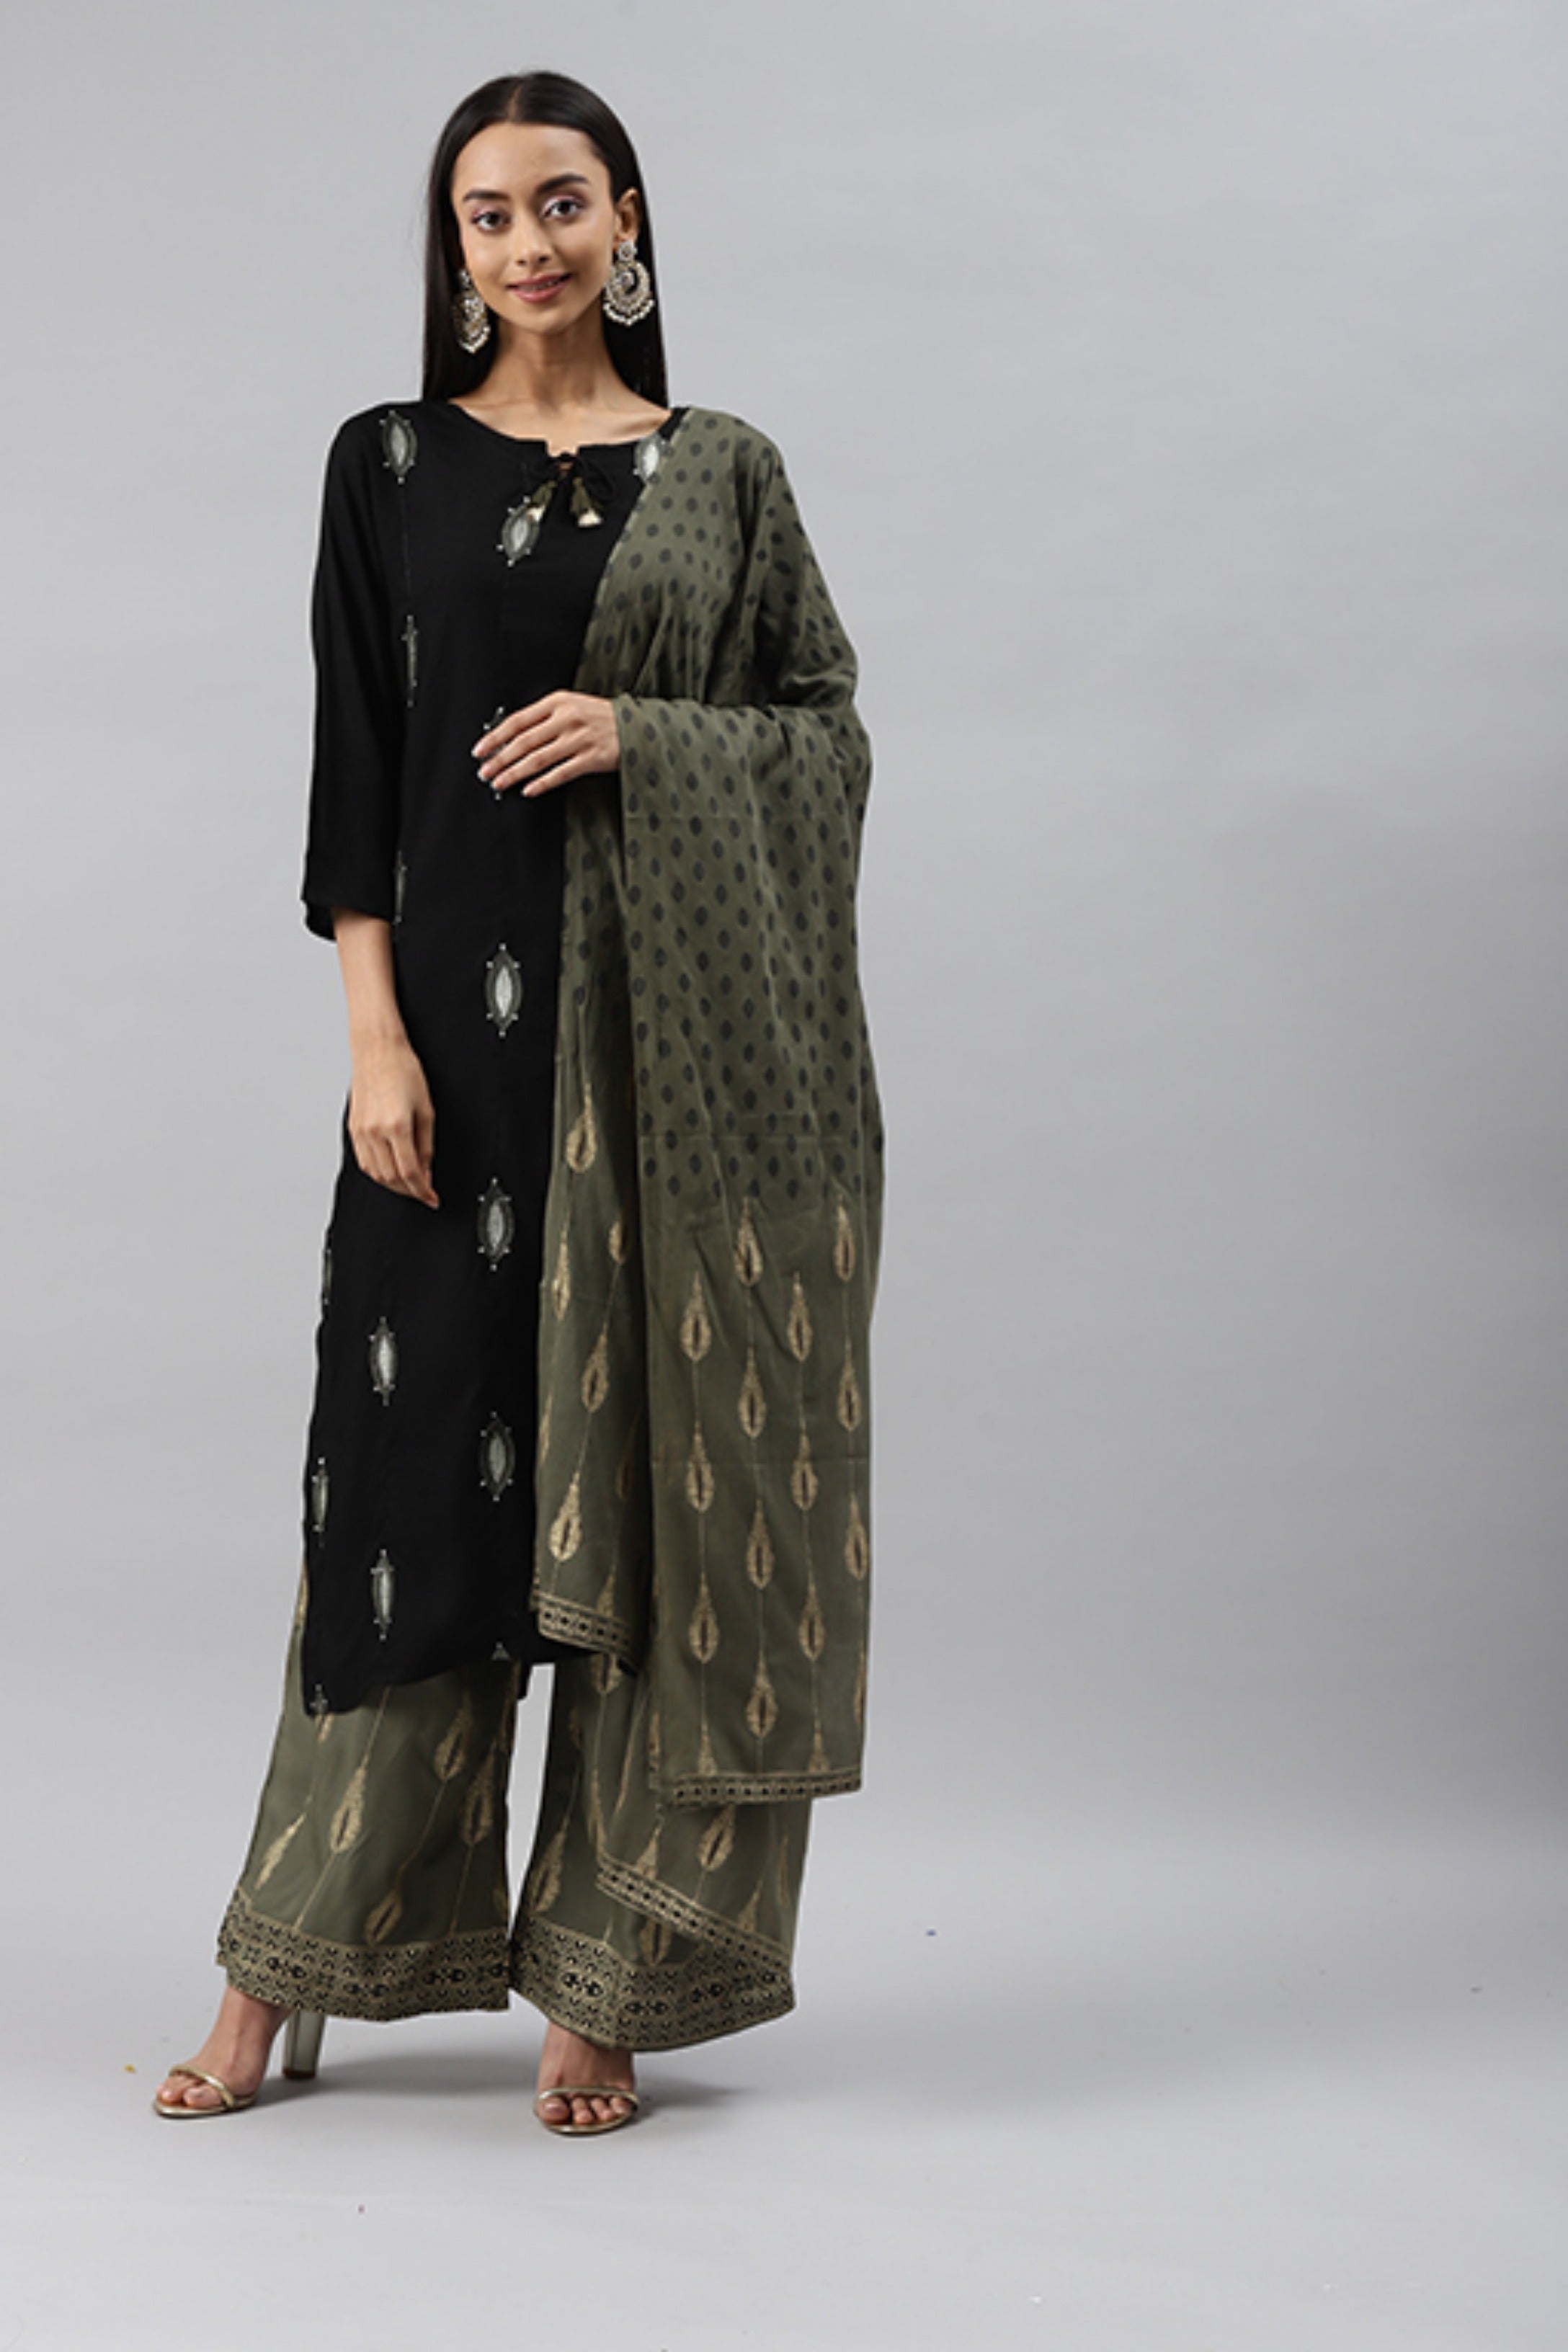 Women's Black and Green Ethnic Motifs Panelled Kurta with Trousers and Dupatta - Meeranshi